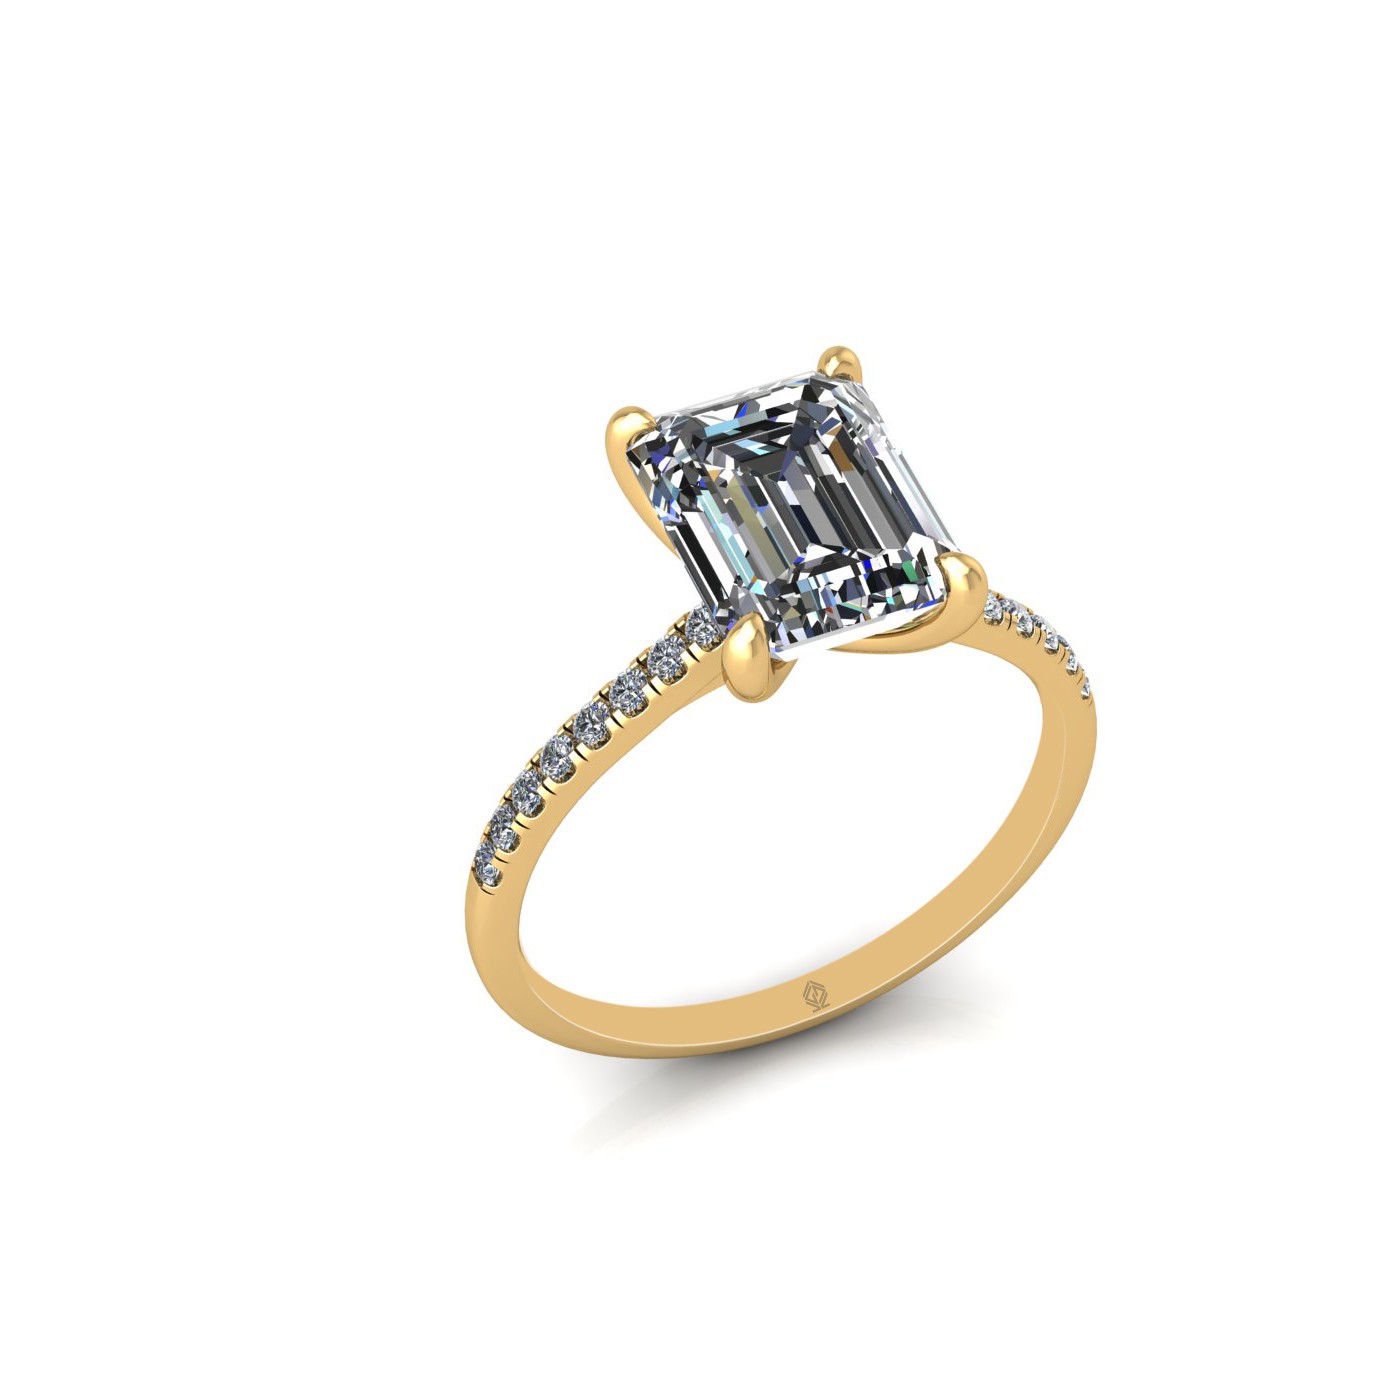 18k yellow gold 2.5ct 4 prongs emerald cut diamond engagement ring with whisper thin pavÉ set band